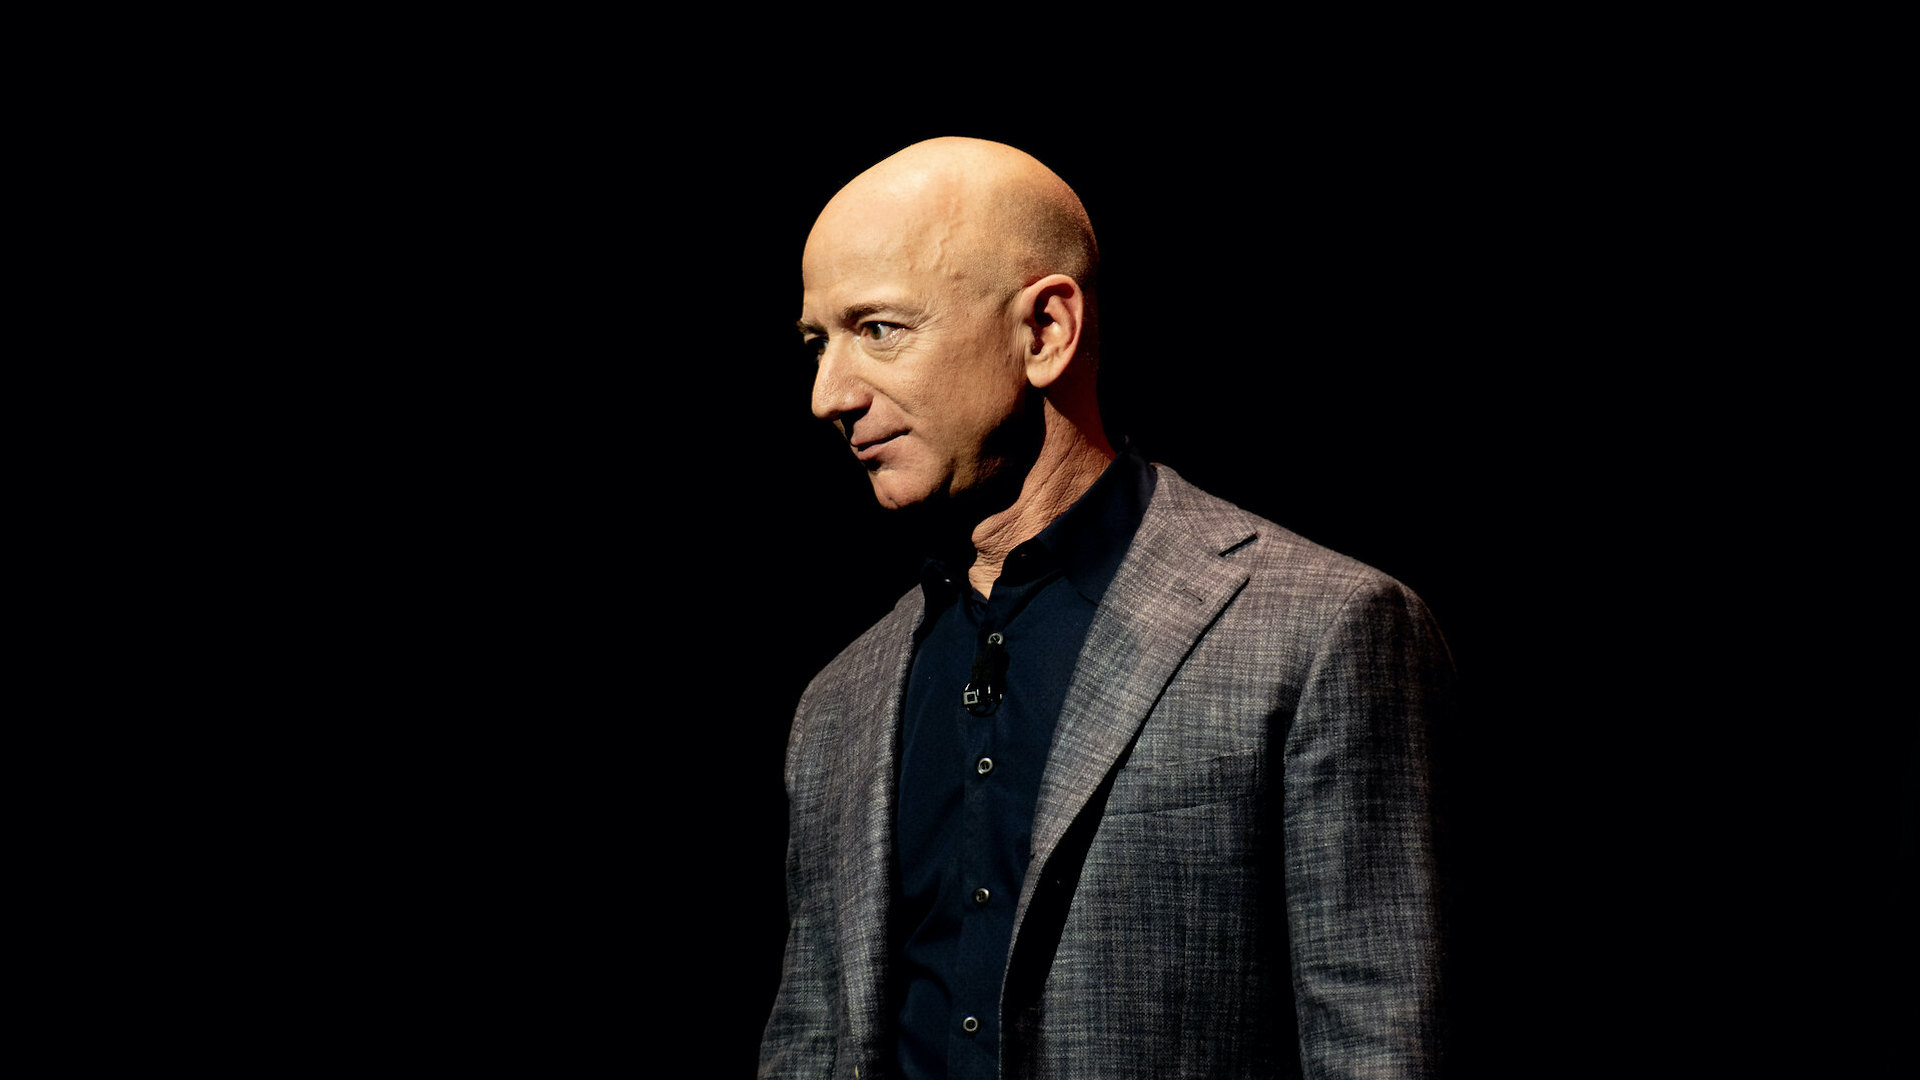 Bad news for jeff bezos is good news for people